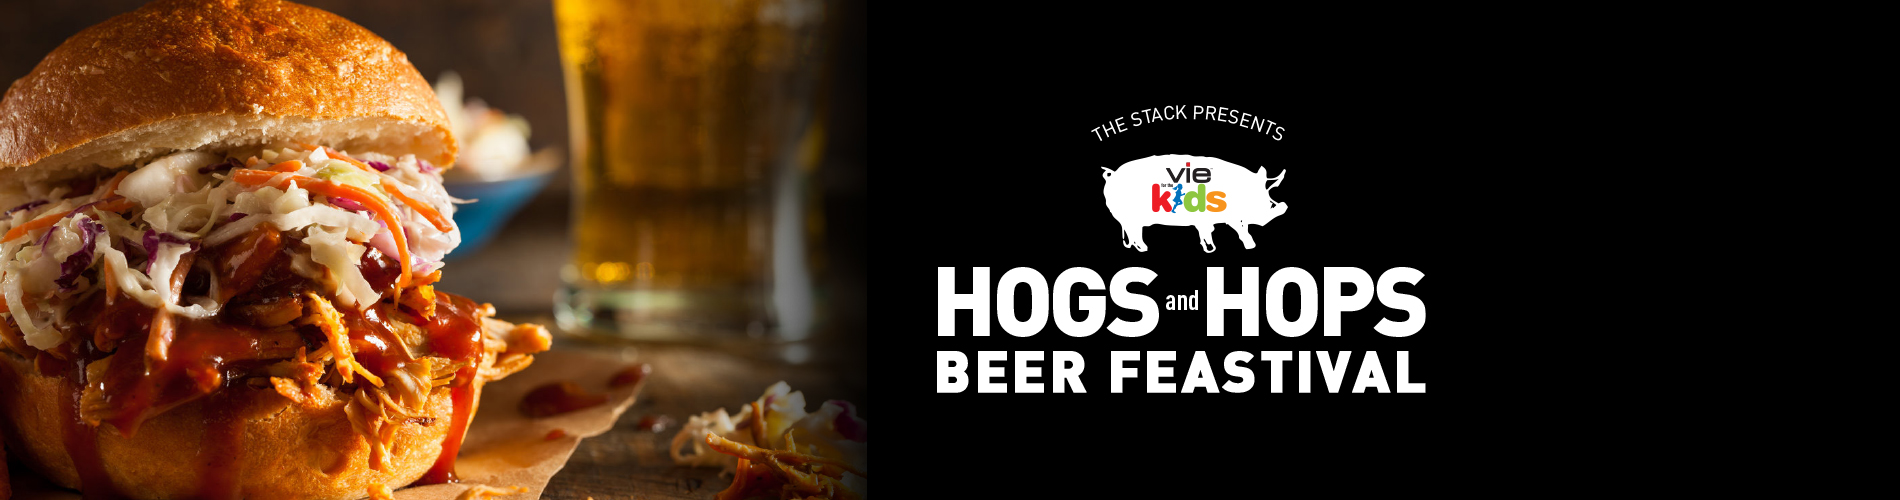 Hogs and Hops Beer Feastival banner image